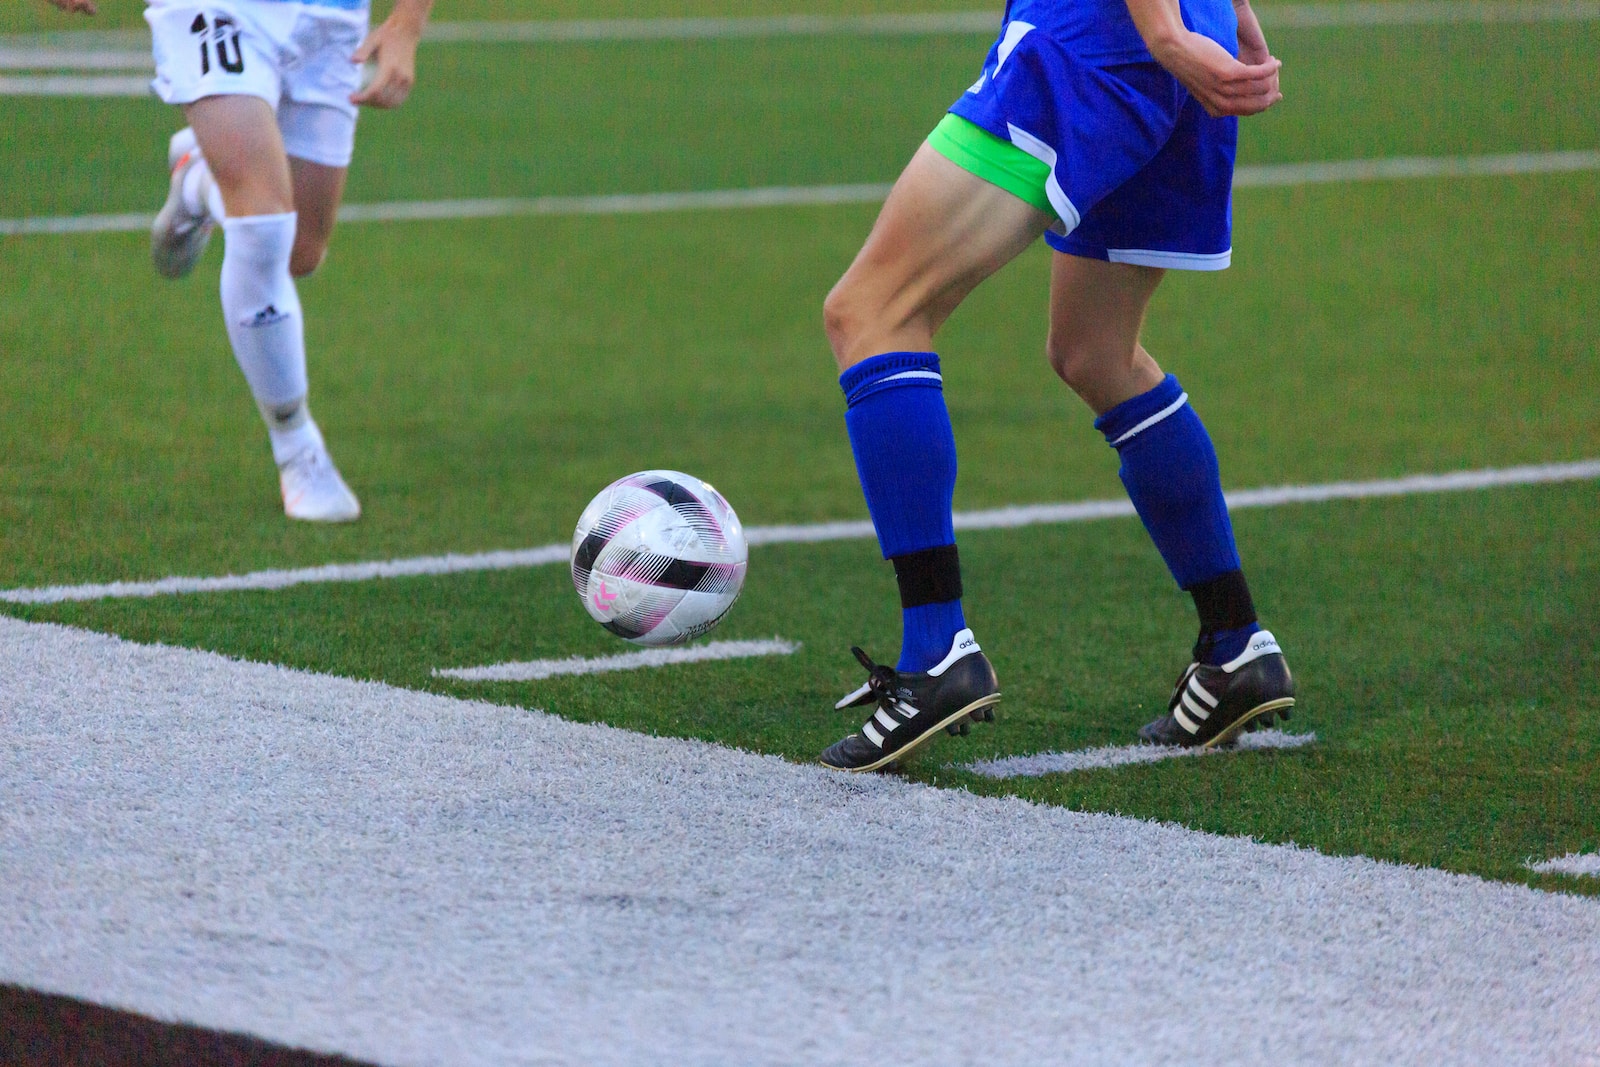 person in blue and white soccer jersey kicking soccer ball on field during daytime